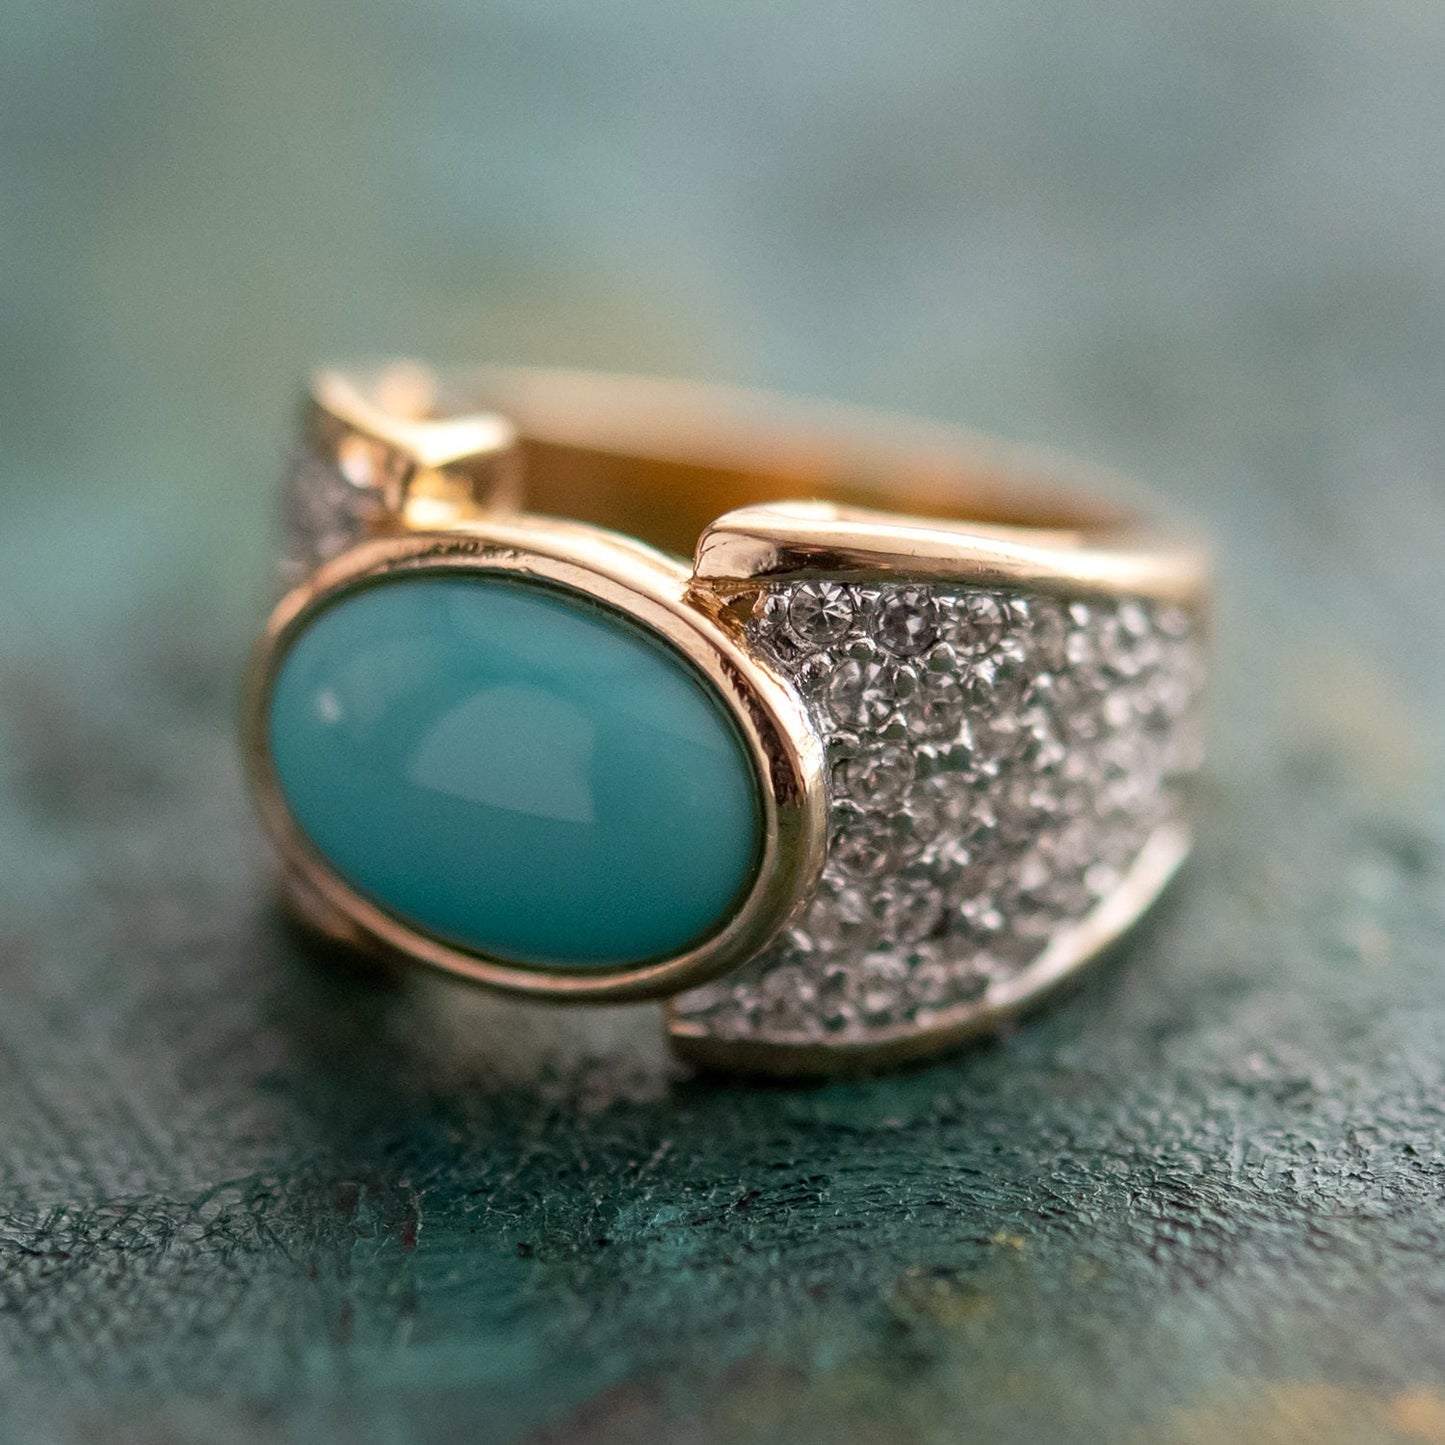 Vintage Ring Turquoise Glass Bead Clear Swarovski Crystals Cocktail Ring 18k Gold Antique Jewlery Womans R1934 - Limited Stock - Never Worn